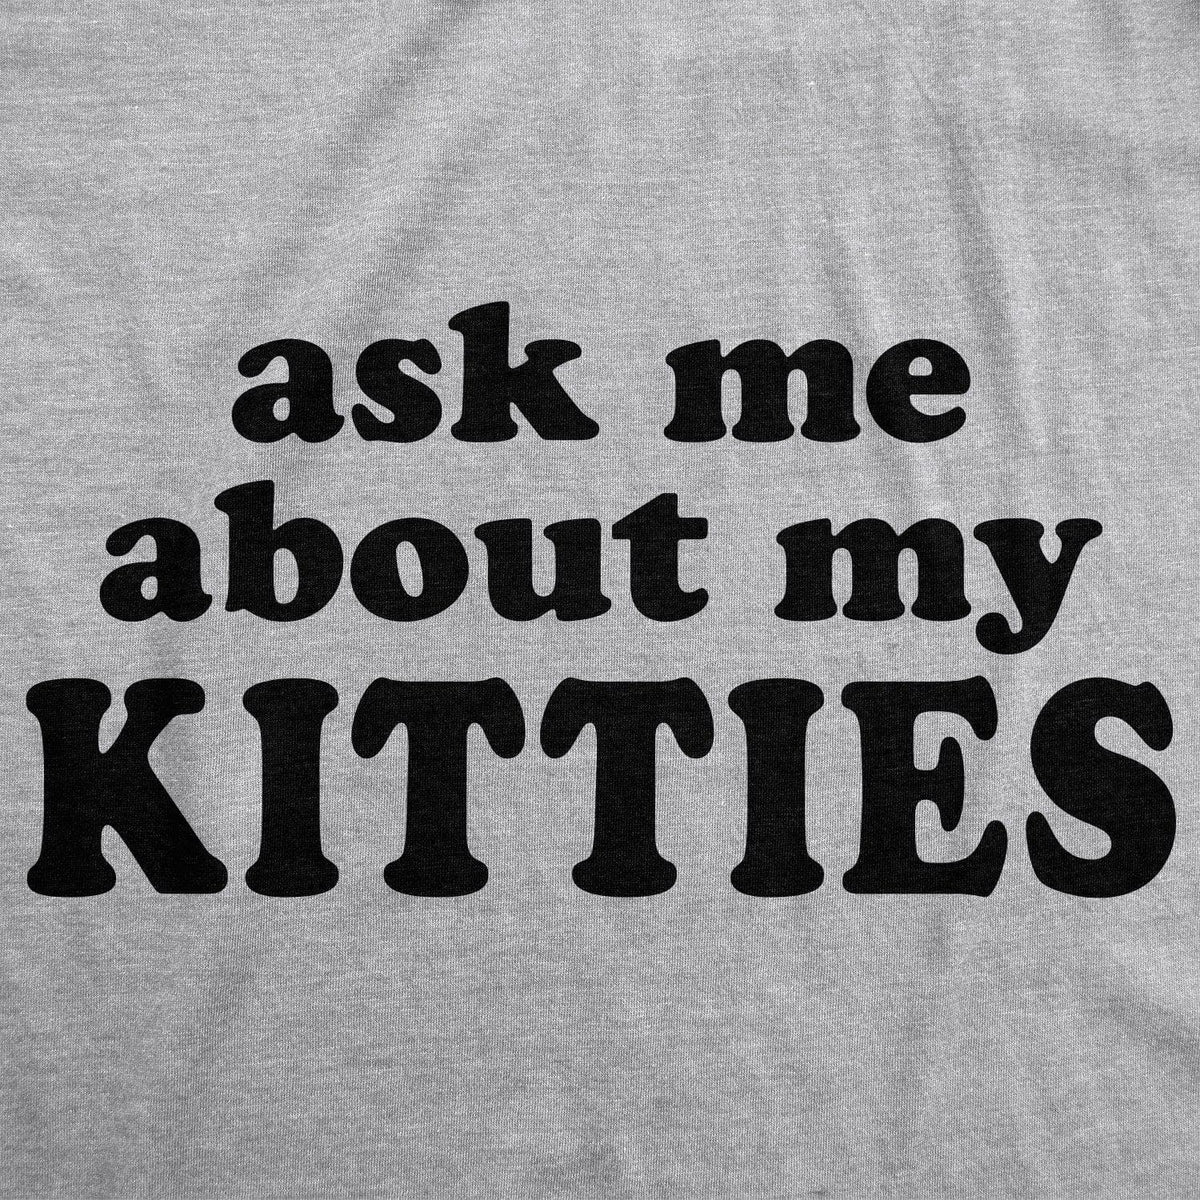 Ask Me About My Kitties Men&#39;s Tshirt  -  Crazy Dog T-Shirts